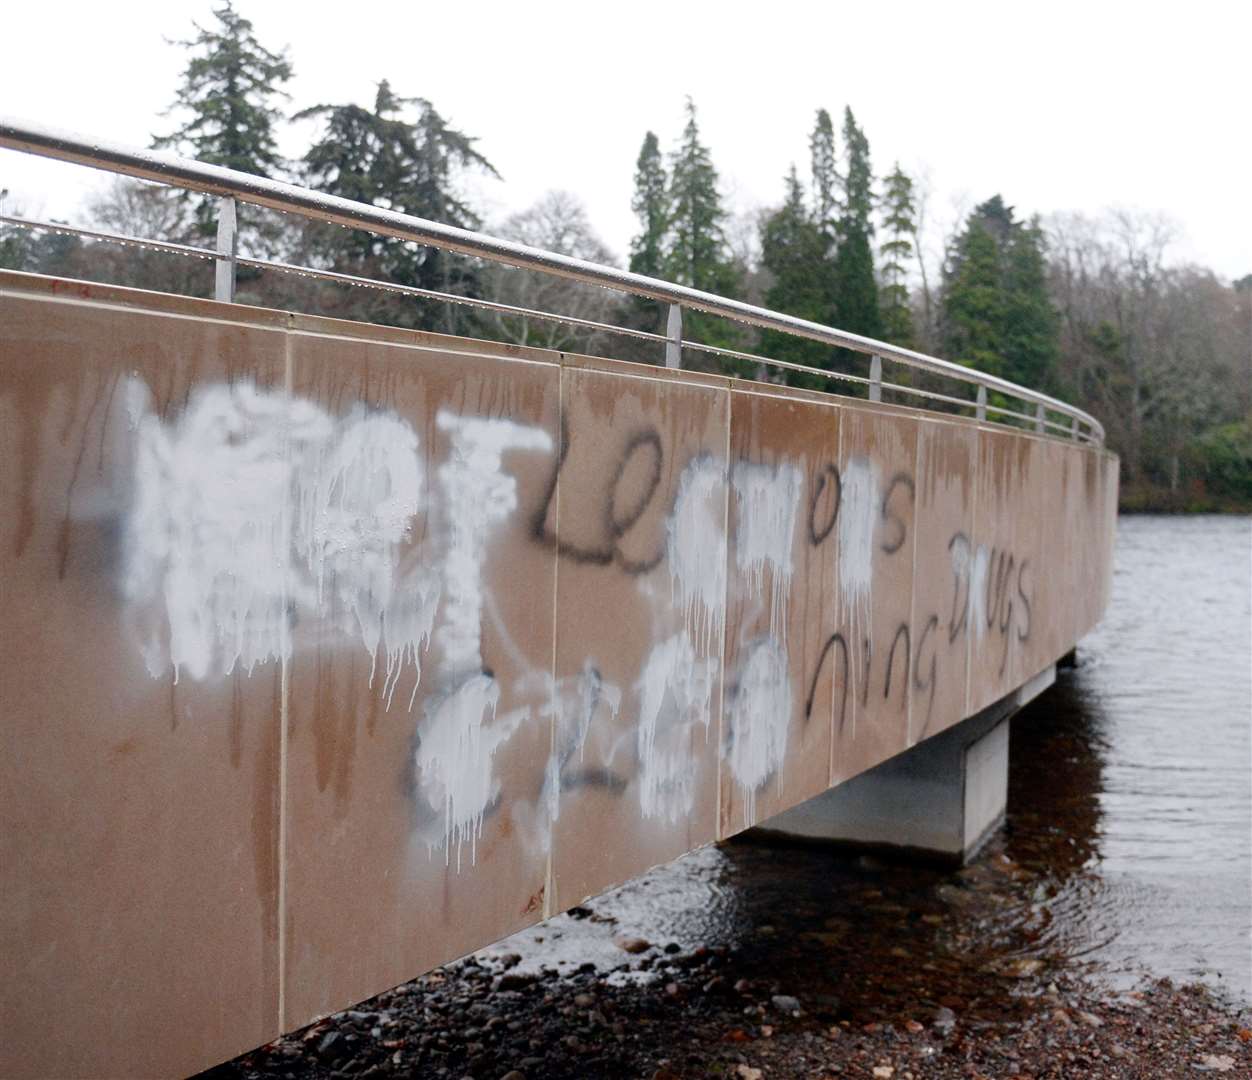 The latest graffiti spotted today at the Gathering Place follows this vandalism earlier in the week. Picture Gary Anthony.